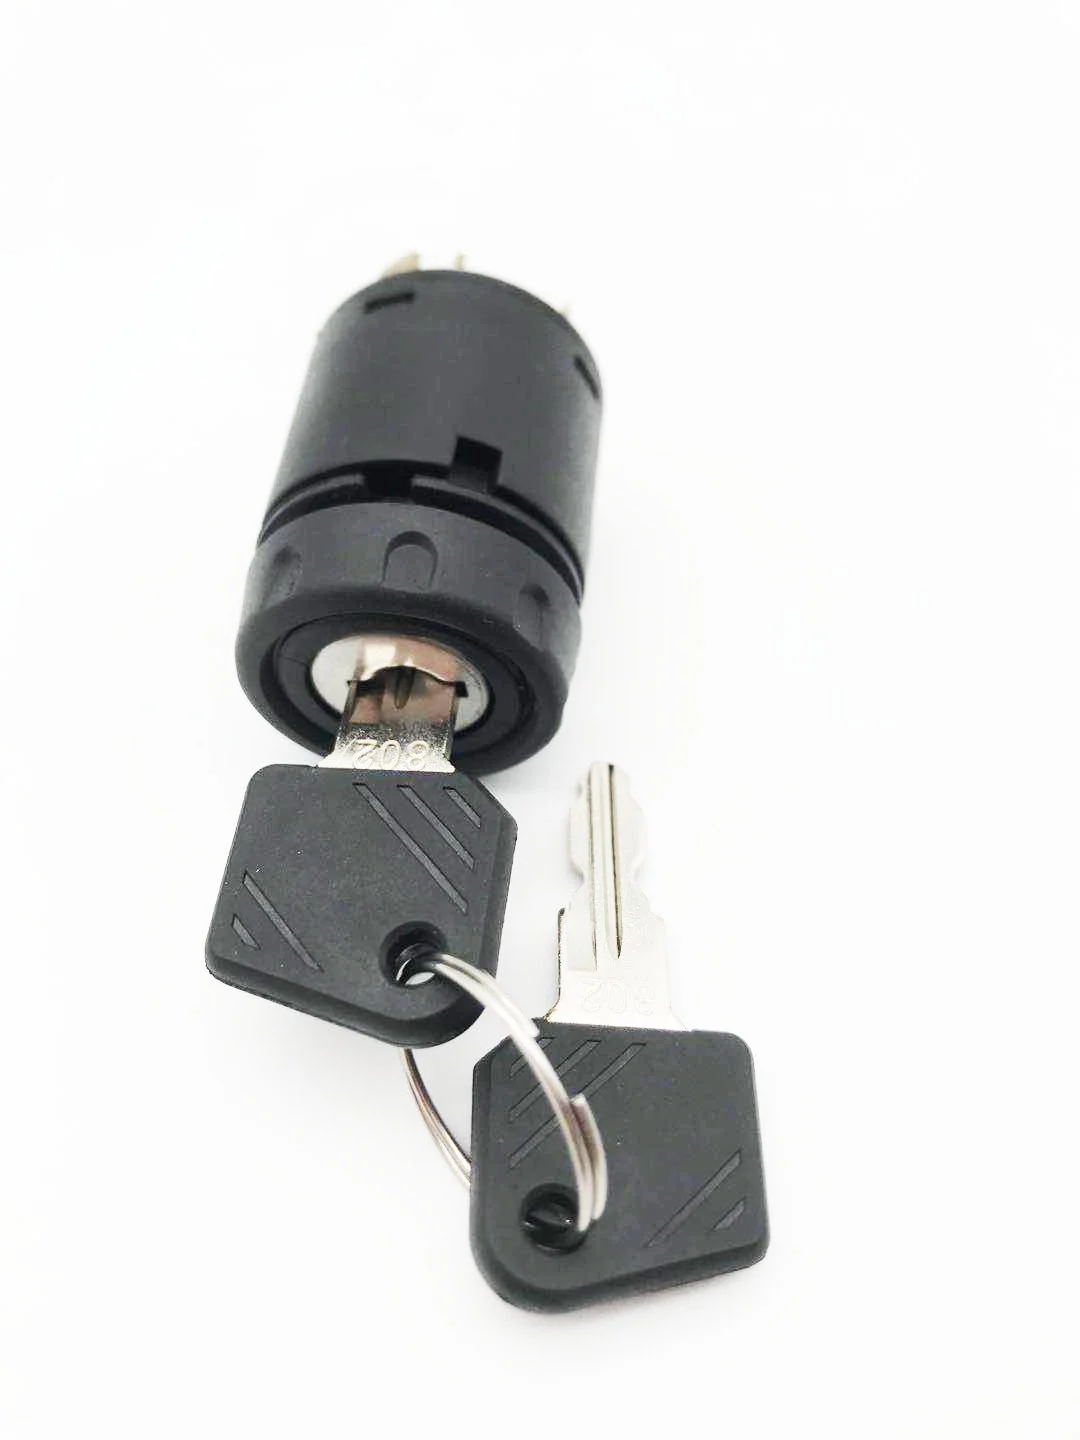 

Suitable for Linde Forklift Lock Ignition Switch Key 7915492619 Power Lock 802/801 Electric Door Lock